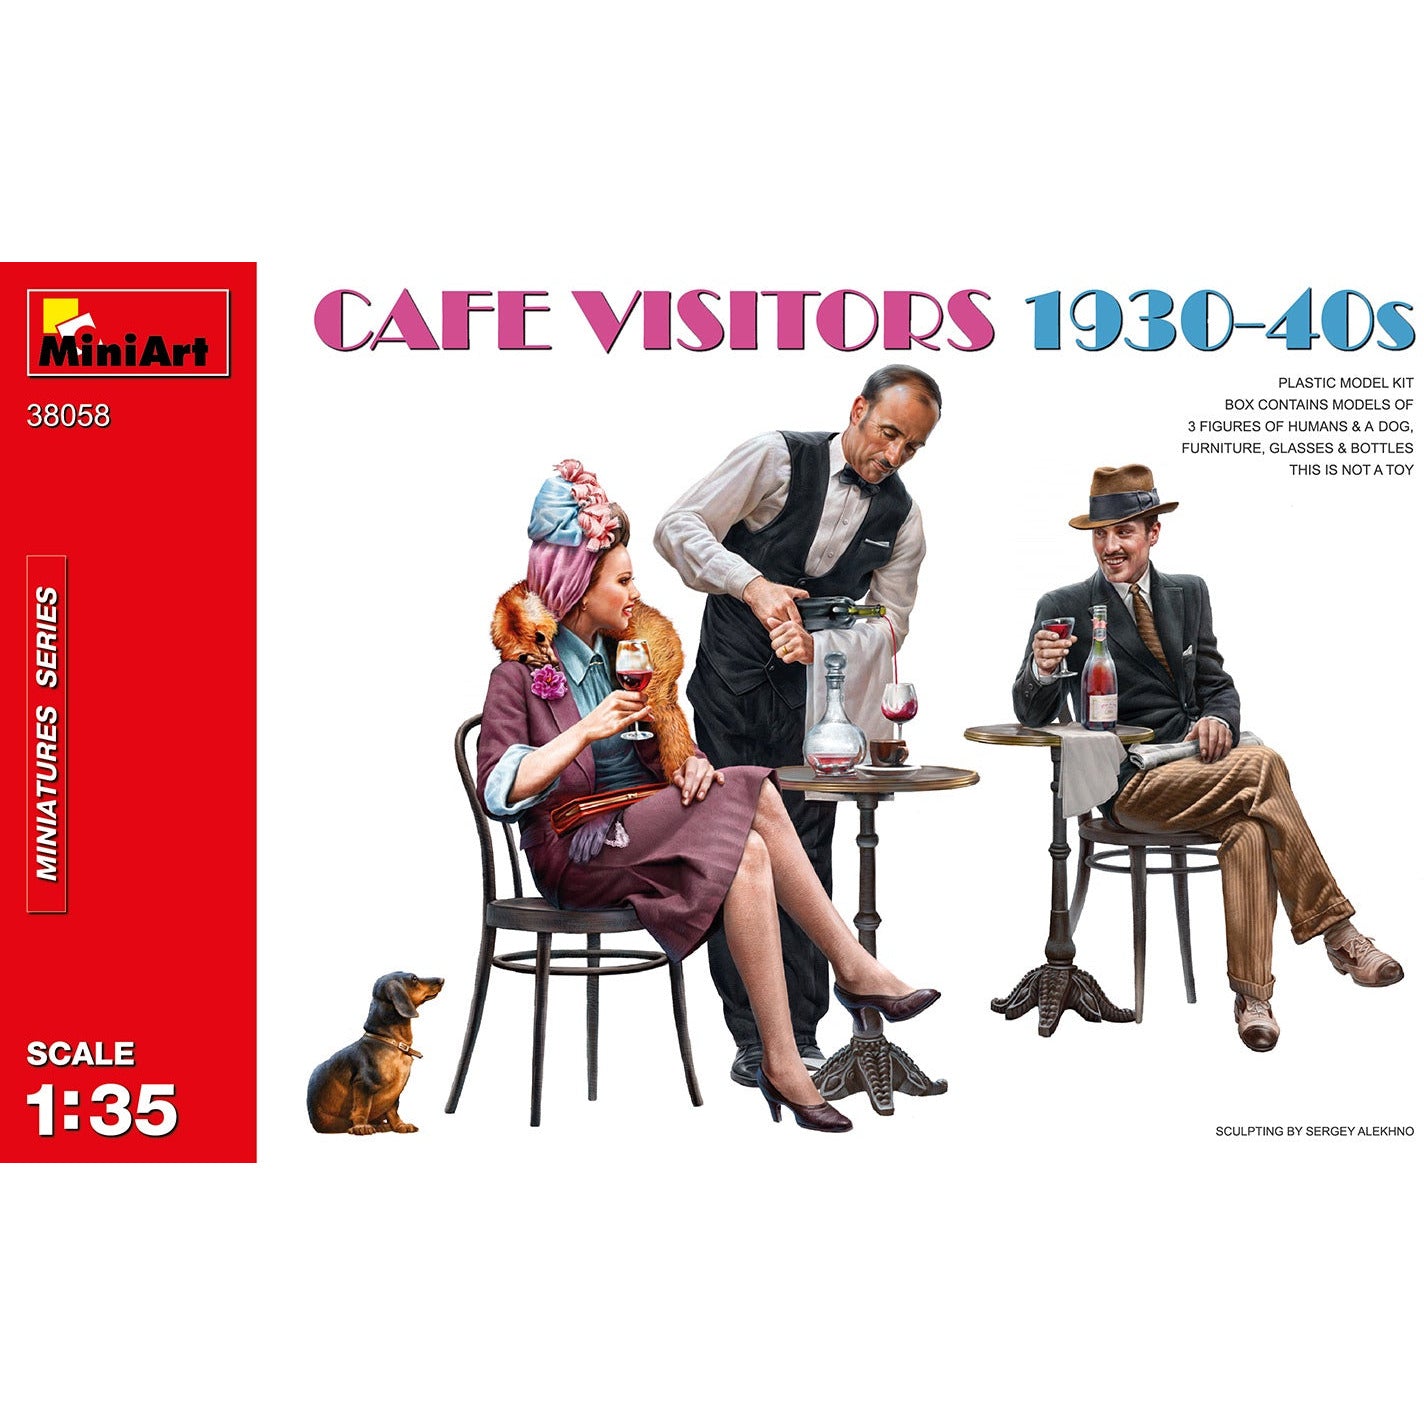 Cafe Visitors 1930-40s #38058 1/35 Figure Kit by MiniArt